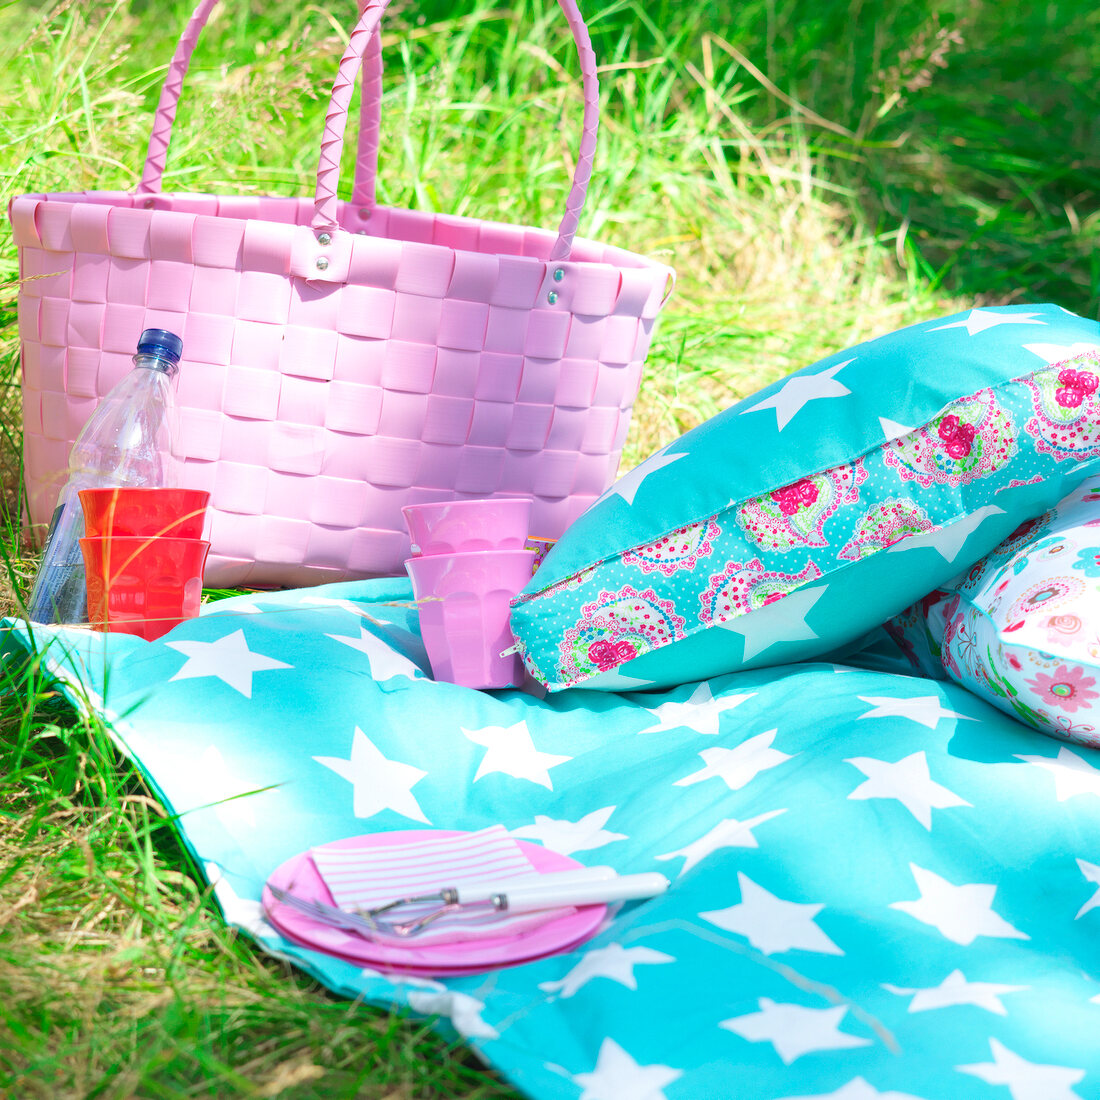 Colourful cushions and blanket with pink wicker basket in garden